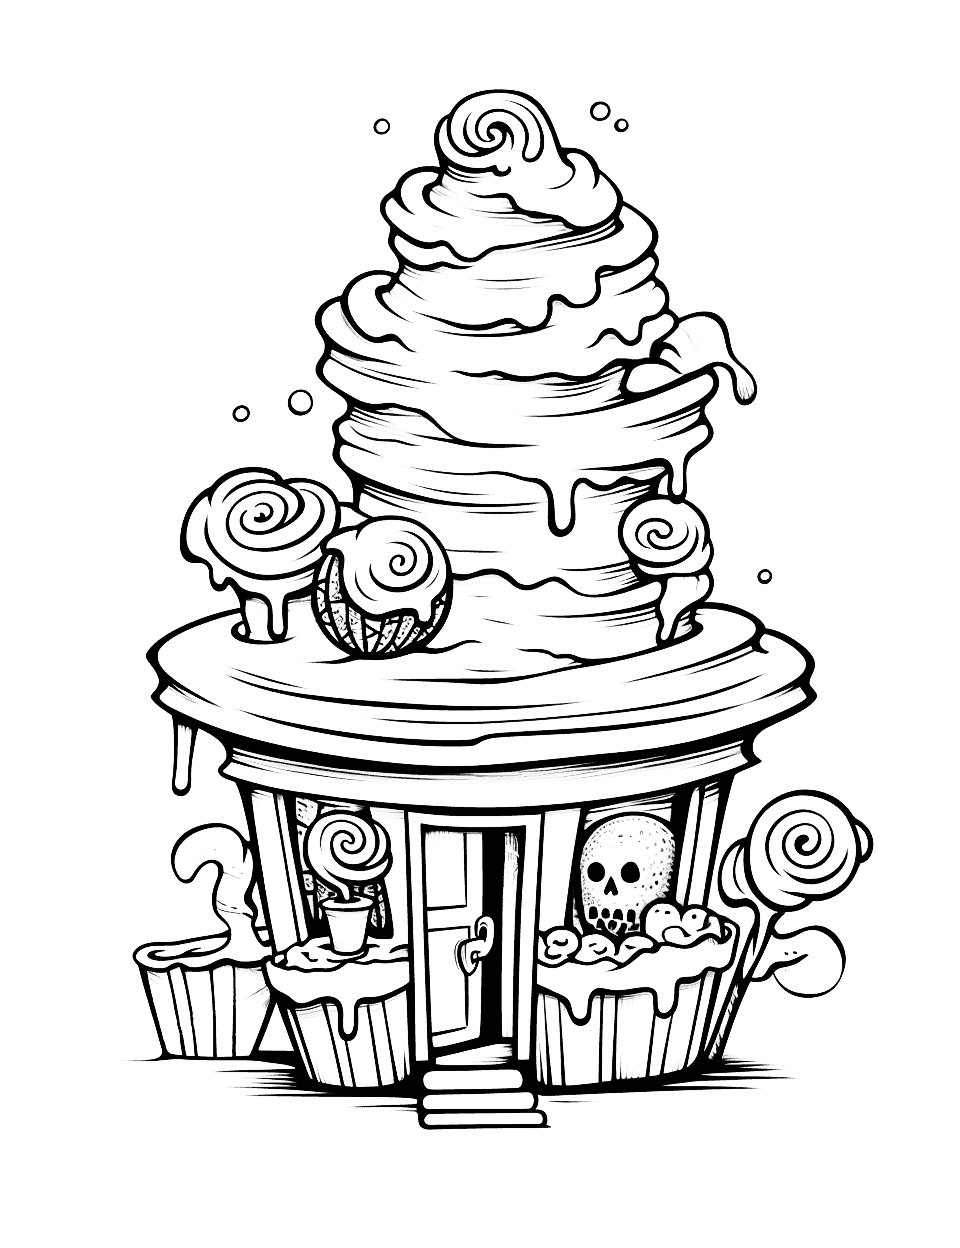 Haunted Ice Cream House Coloring Page - A Halloween-inspired spooky ice cream parlor.